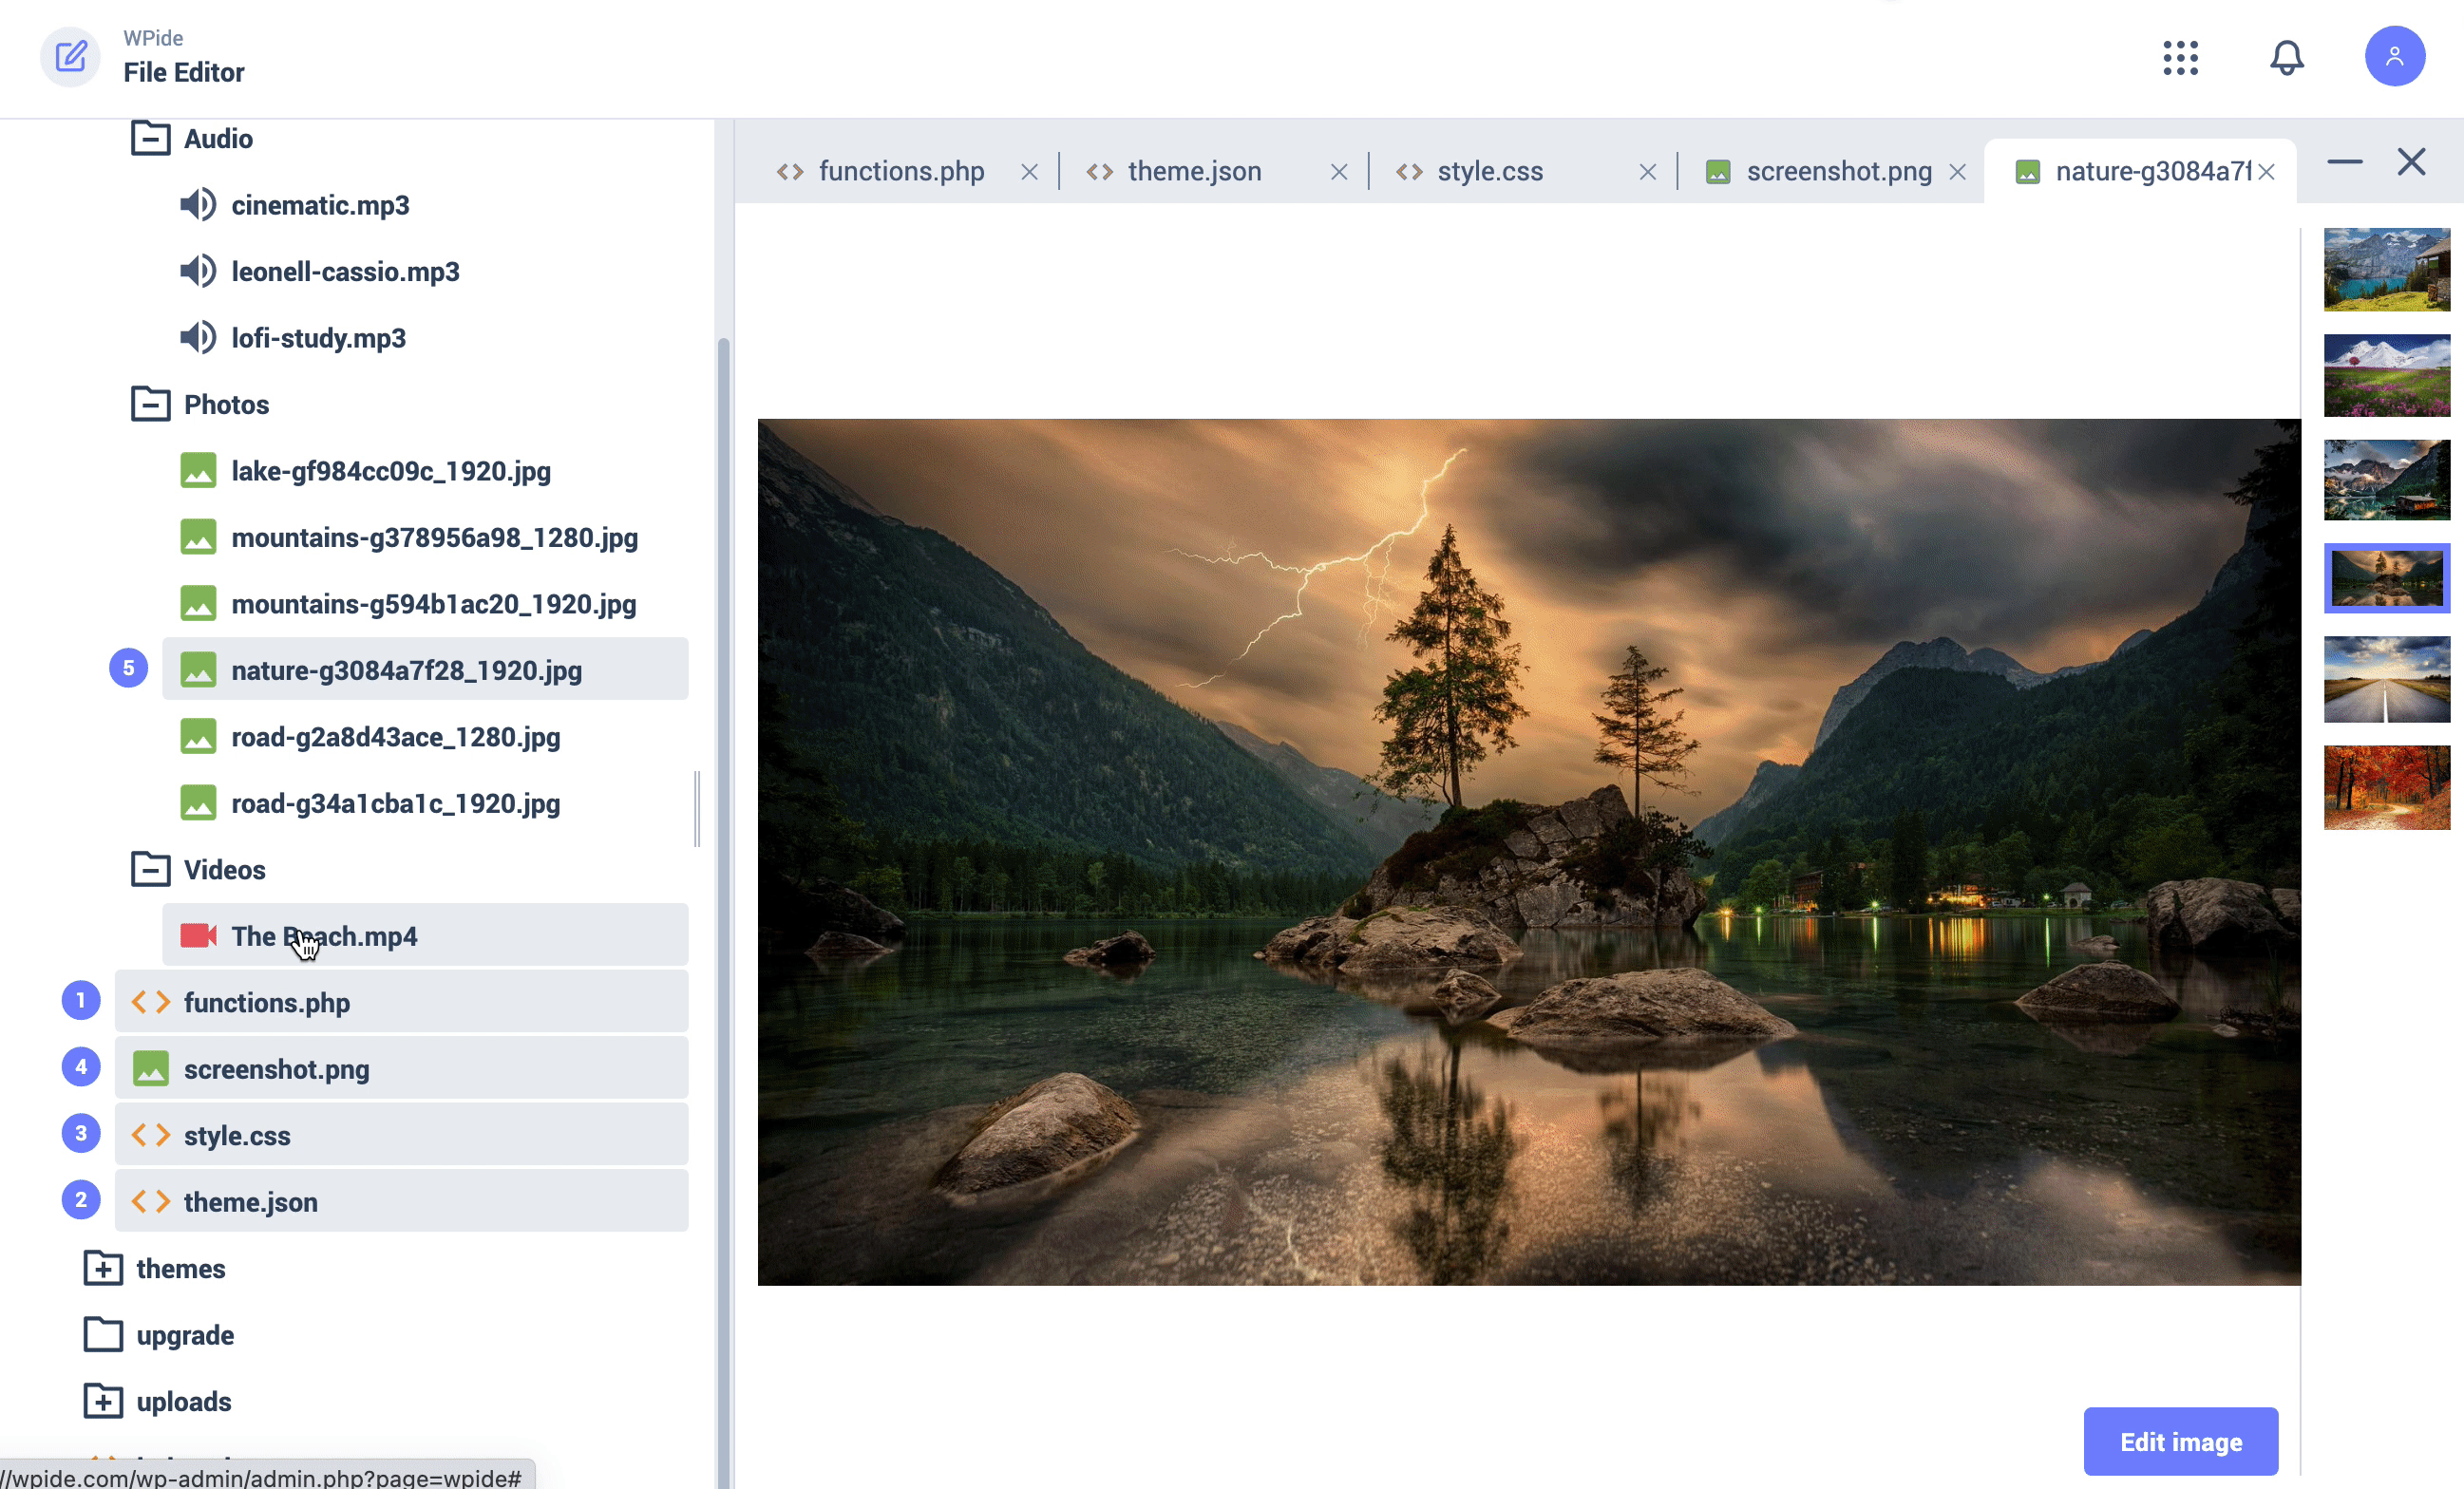 Image Gallery Viewer